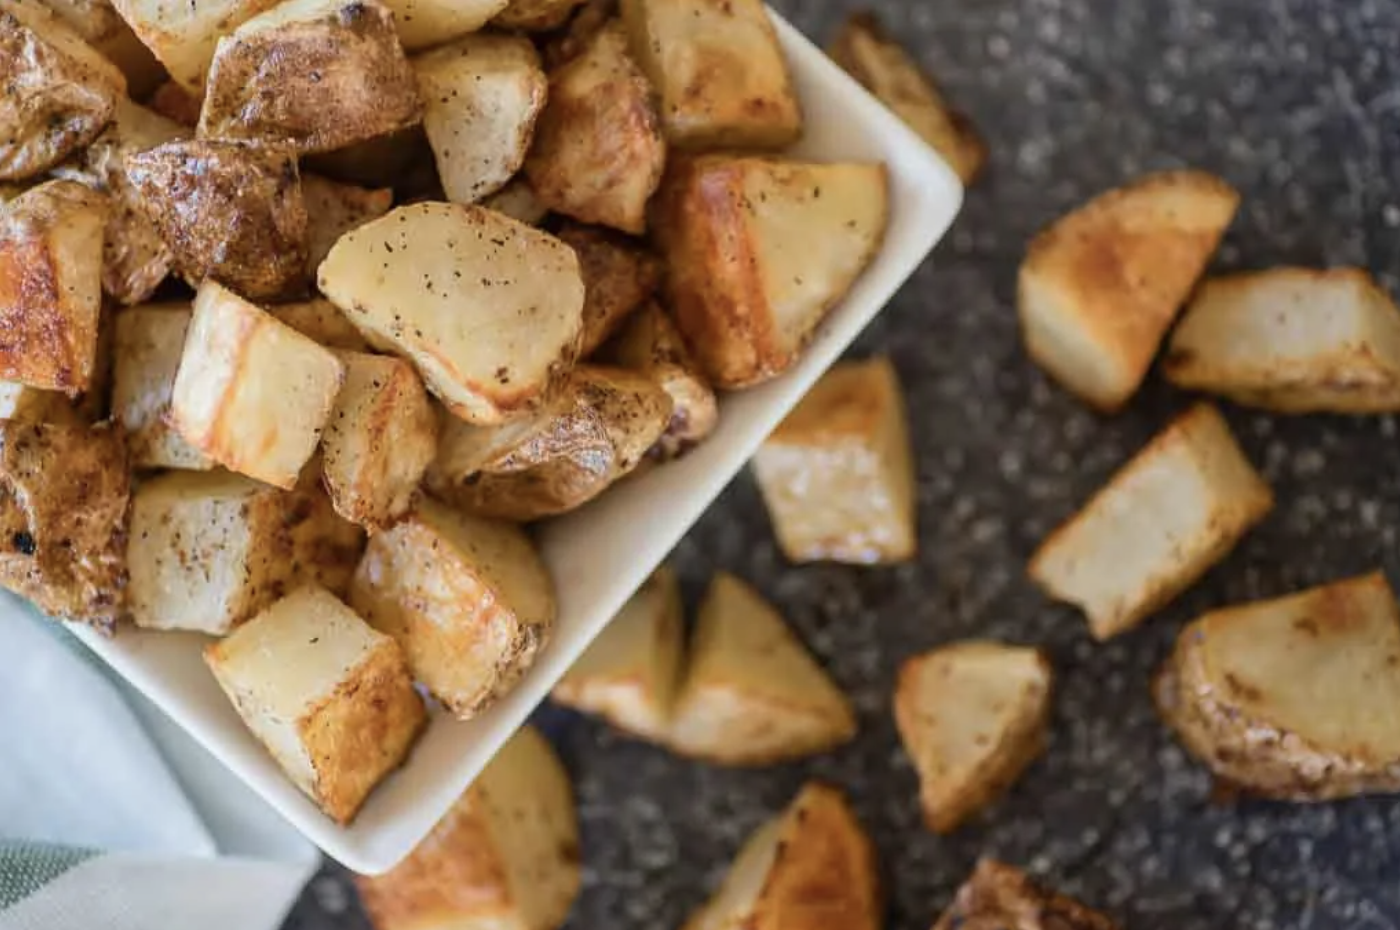 The Best Salt and Vinegar Potatoes to Pair with Any Meal